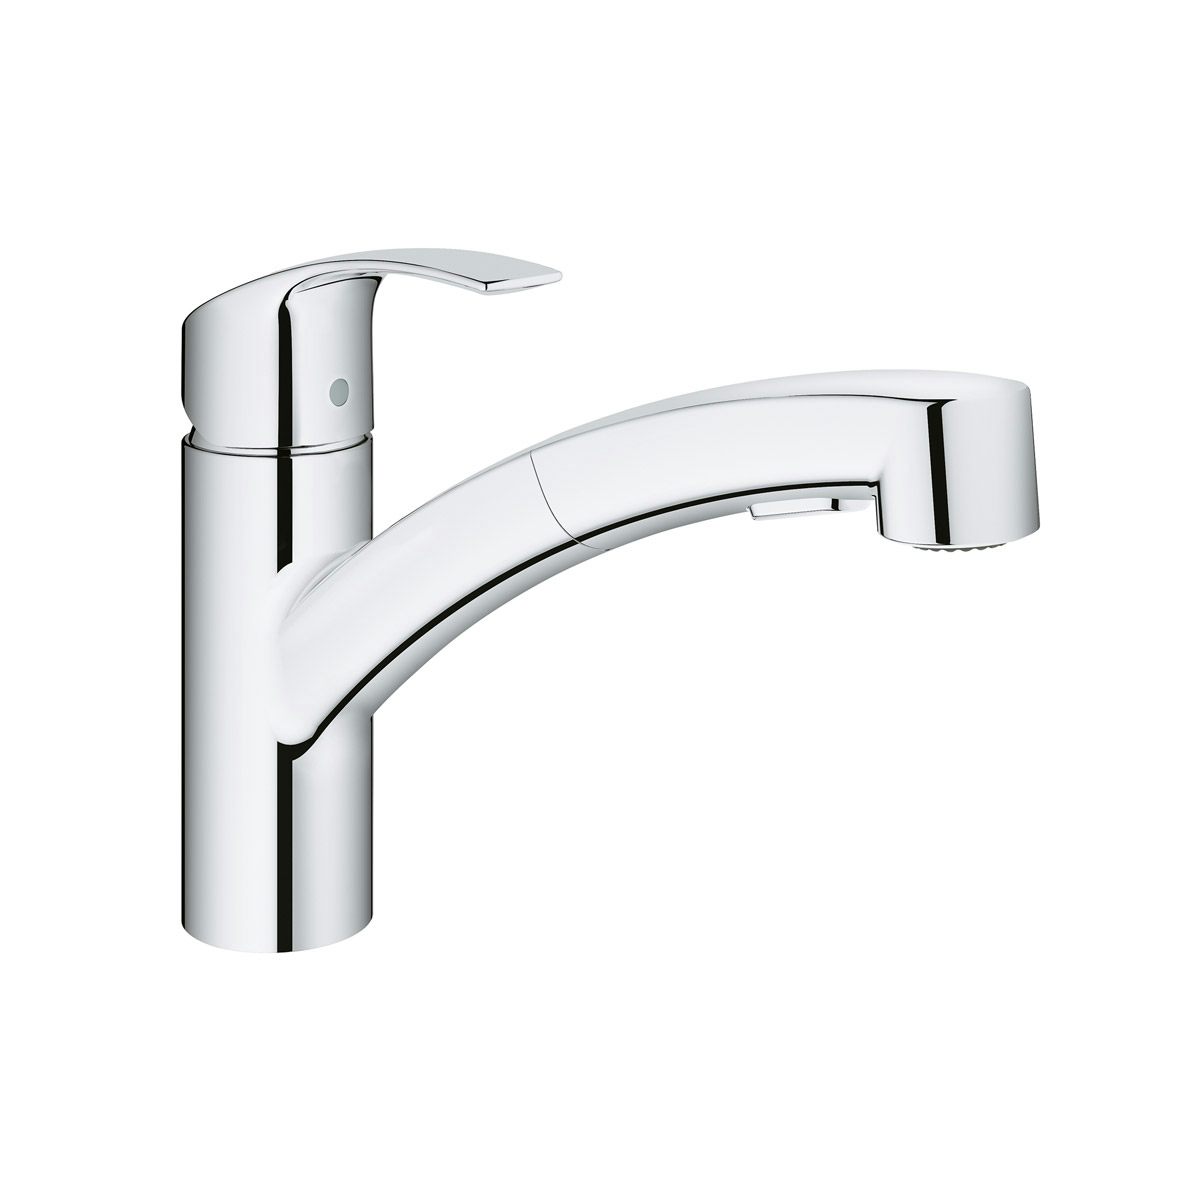 Grohe Eurosmart pull out kitchen tap with pull out spout